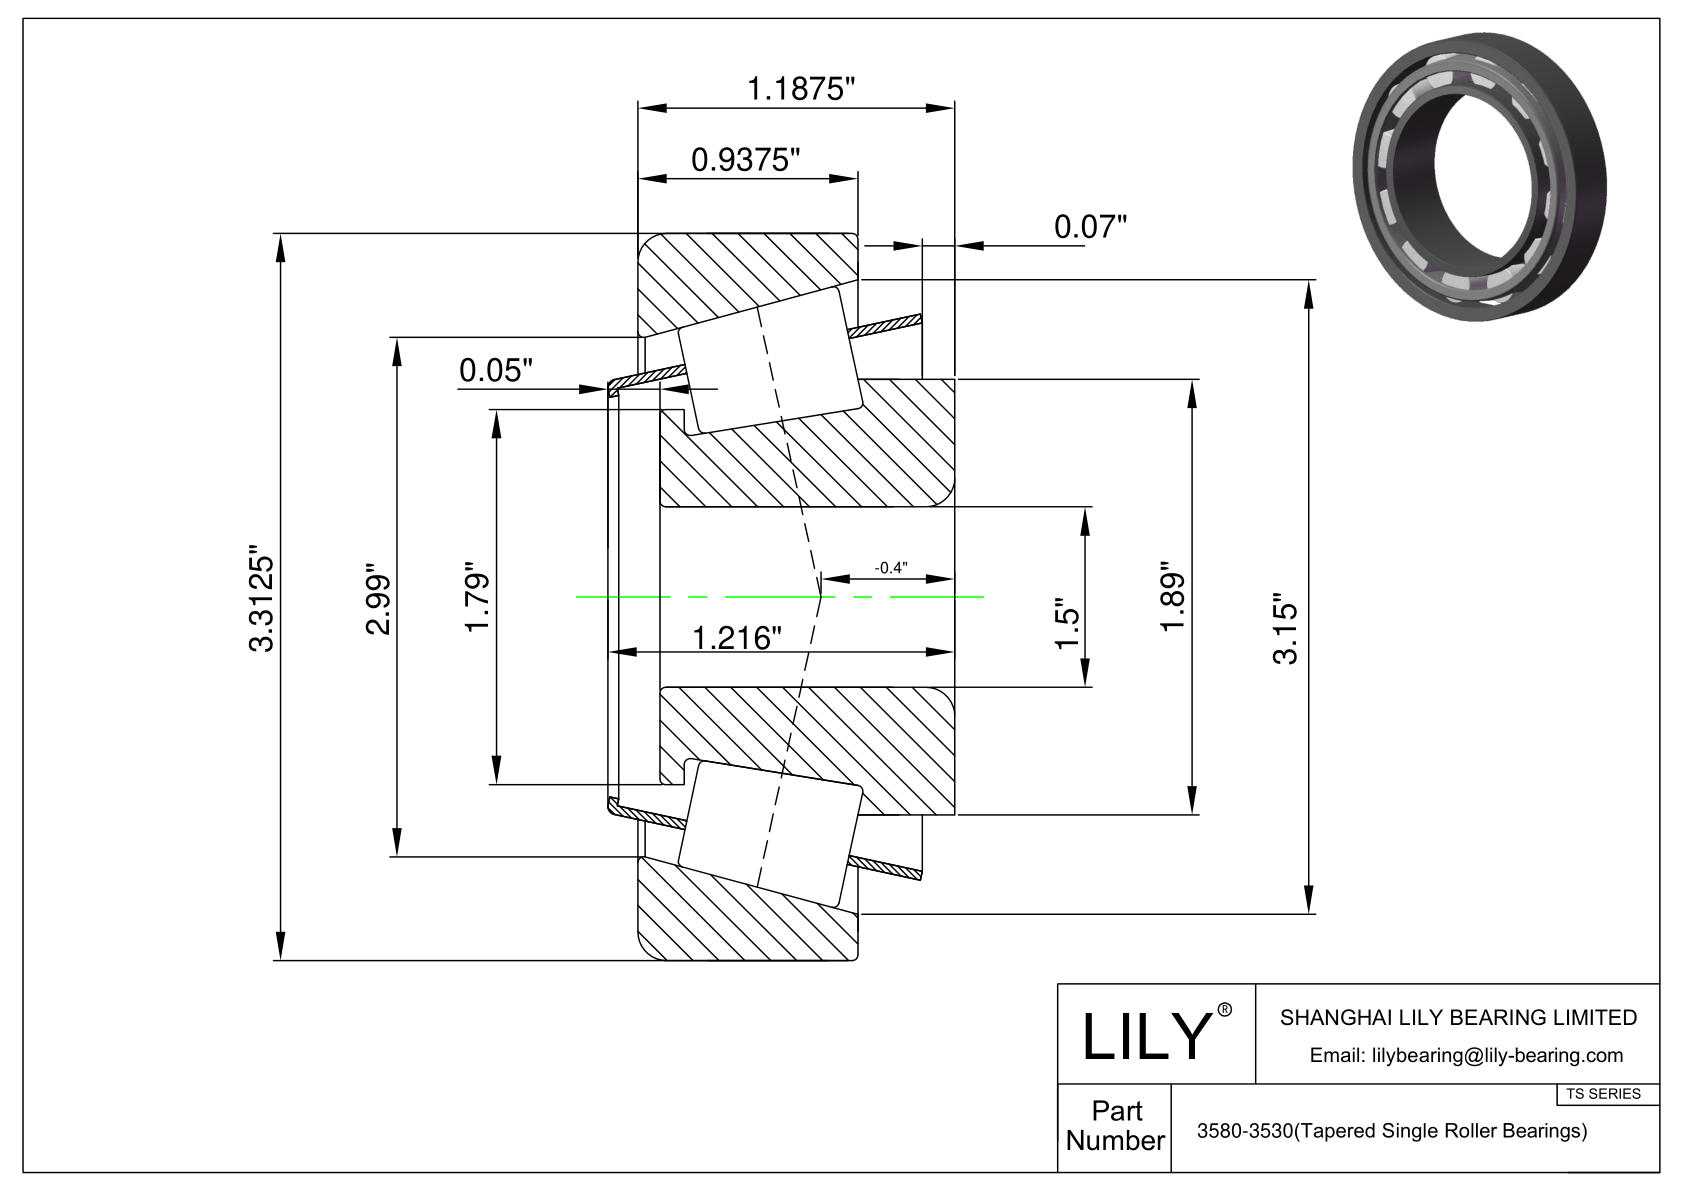 3580-3530 TS (Tapered Single Roller Bearings) (Imperial) cad drawing